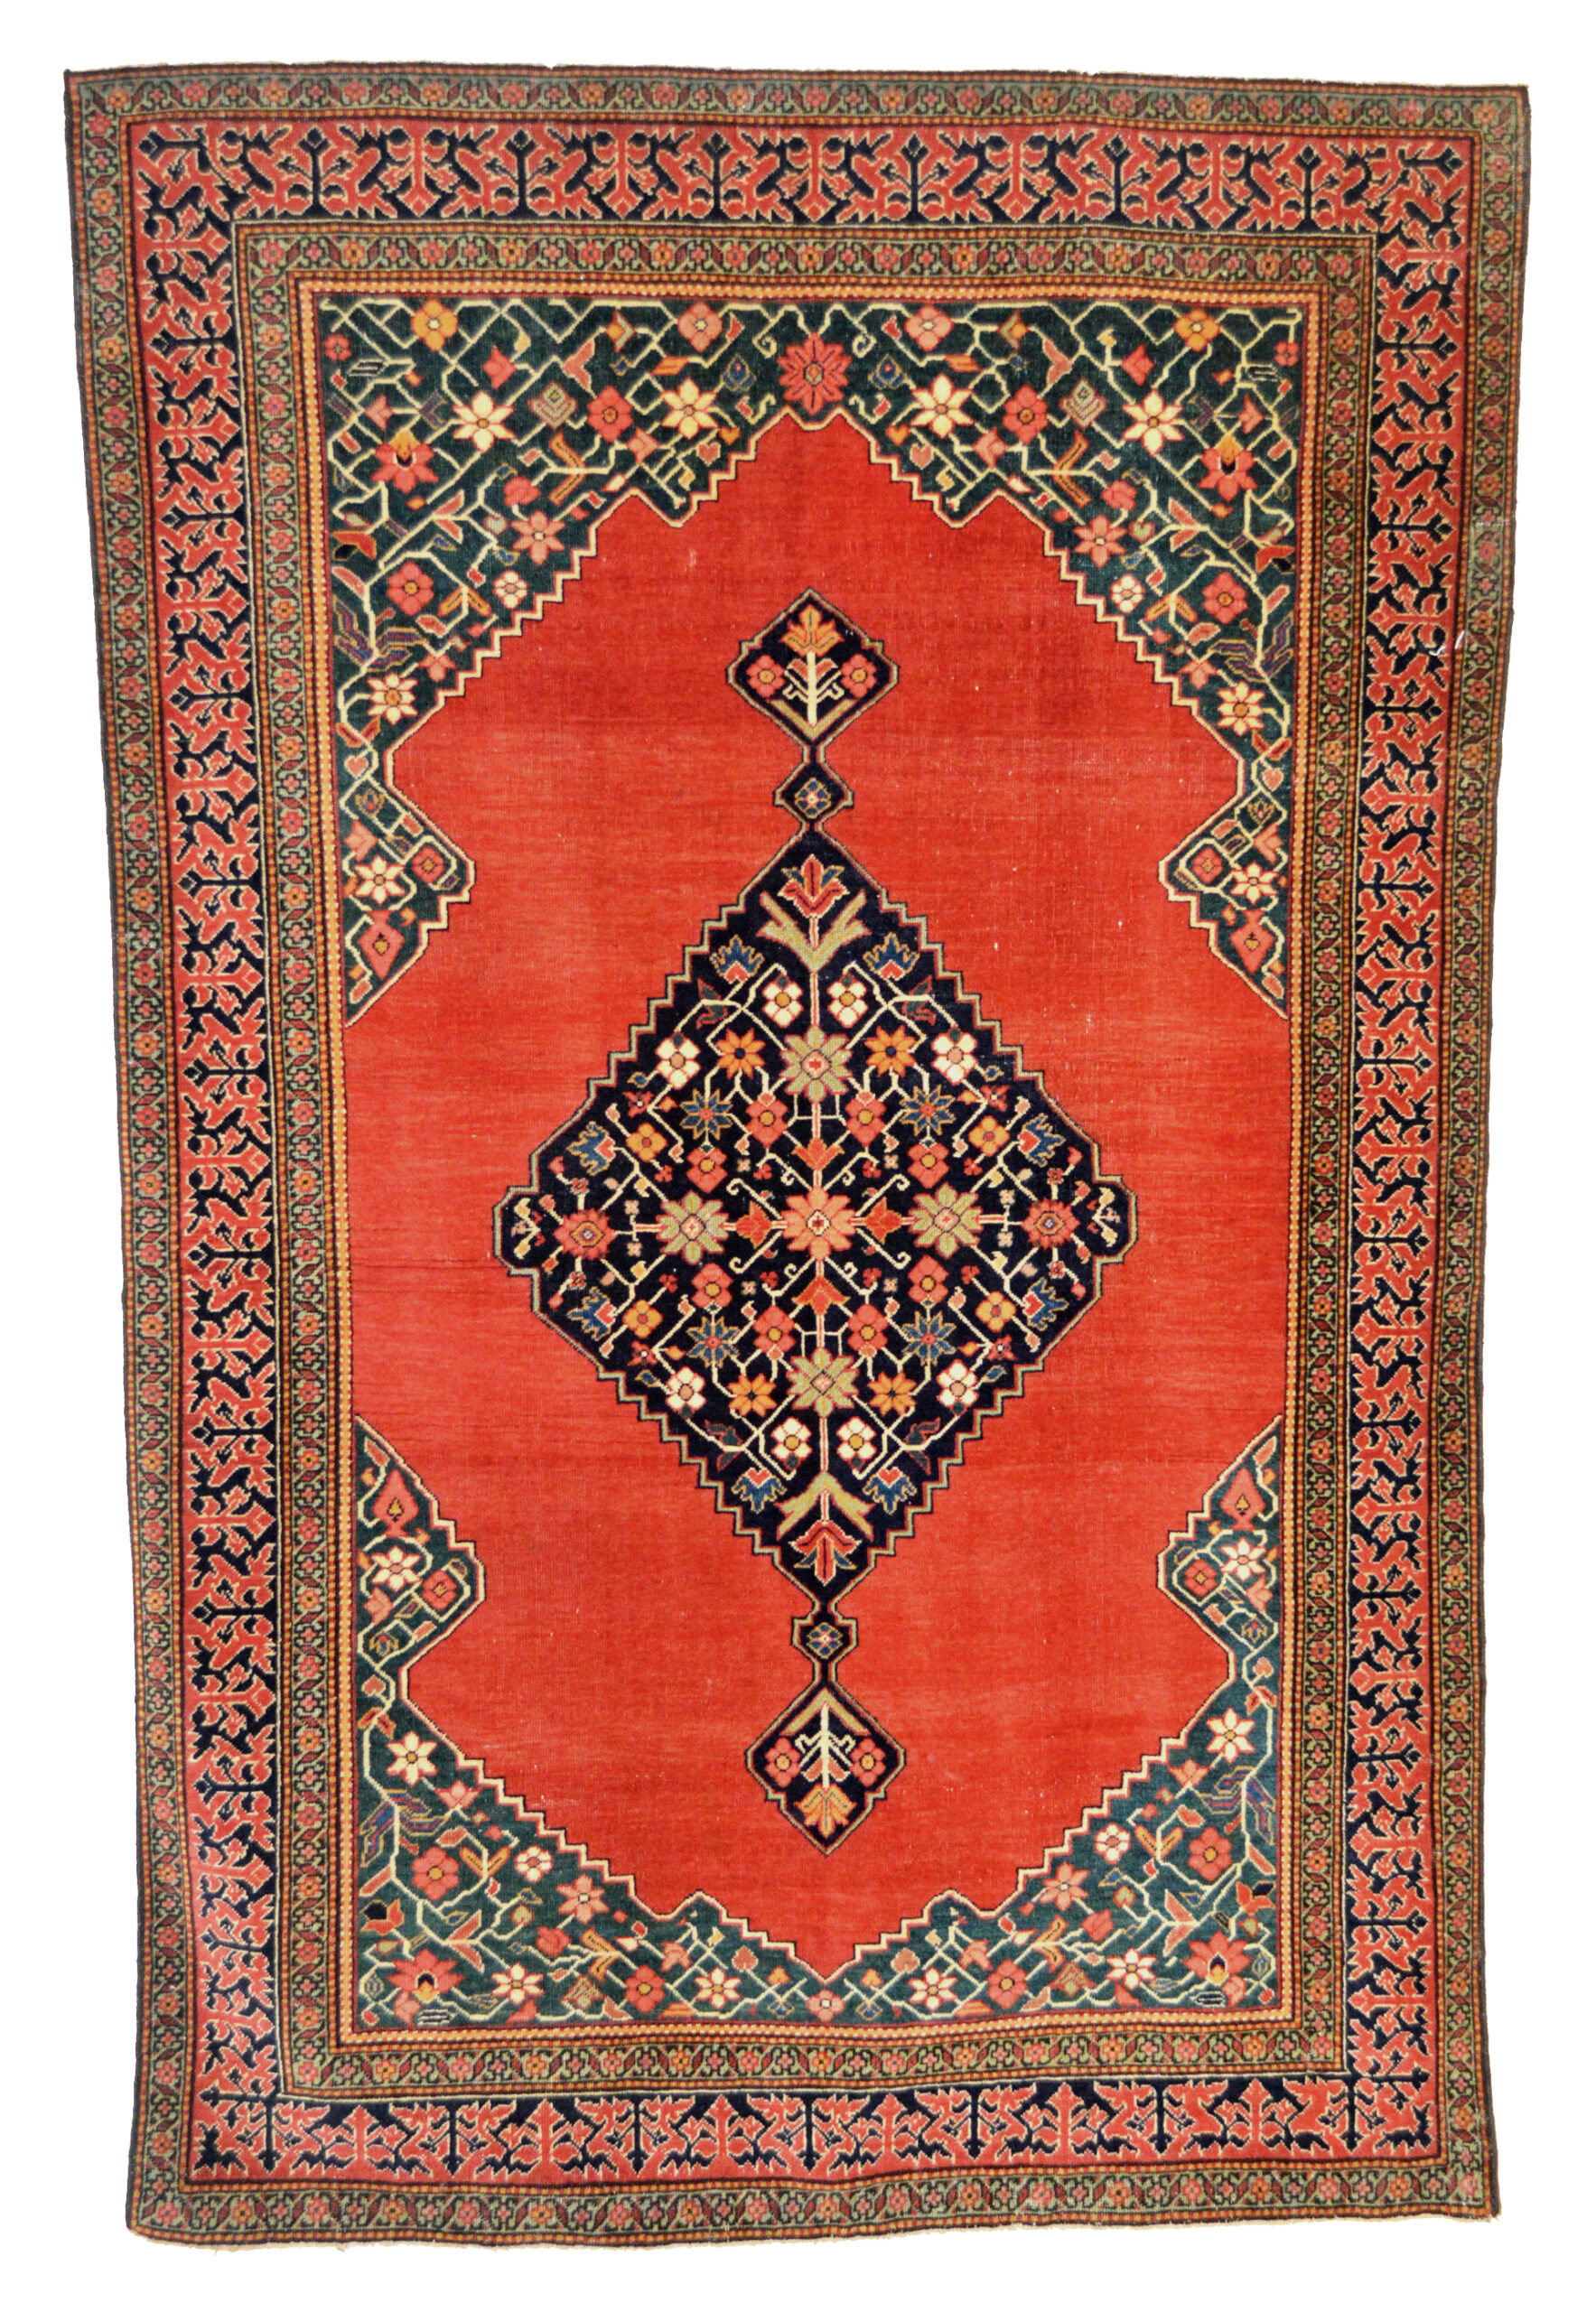 An antique Persian Fereghan rug with a red open field that is decorated with a navy blue medallion and framed by green corner spandrels. Douglas Stock Gallery, antique Oriental rugs and Persian carpets Boston,MA area